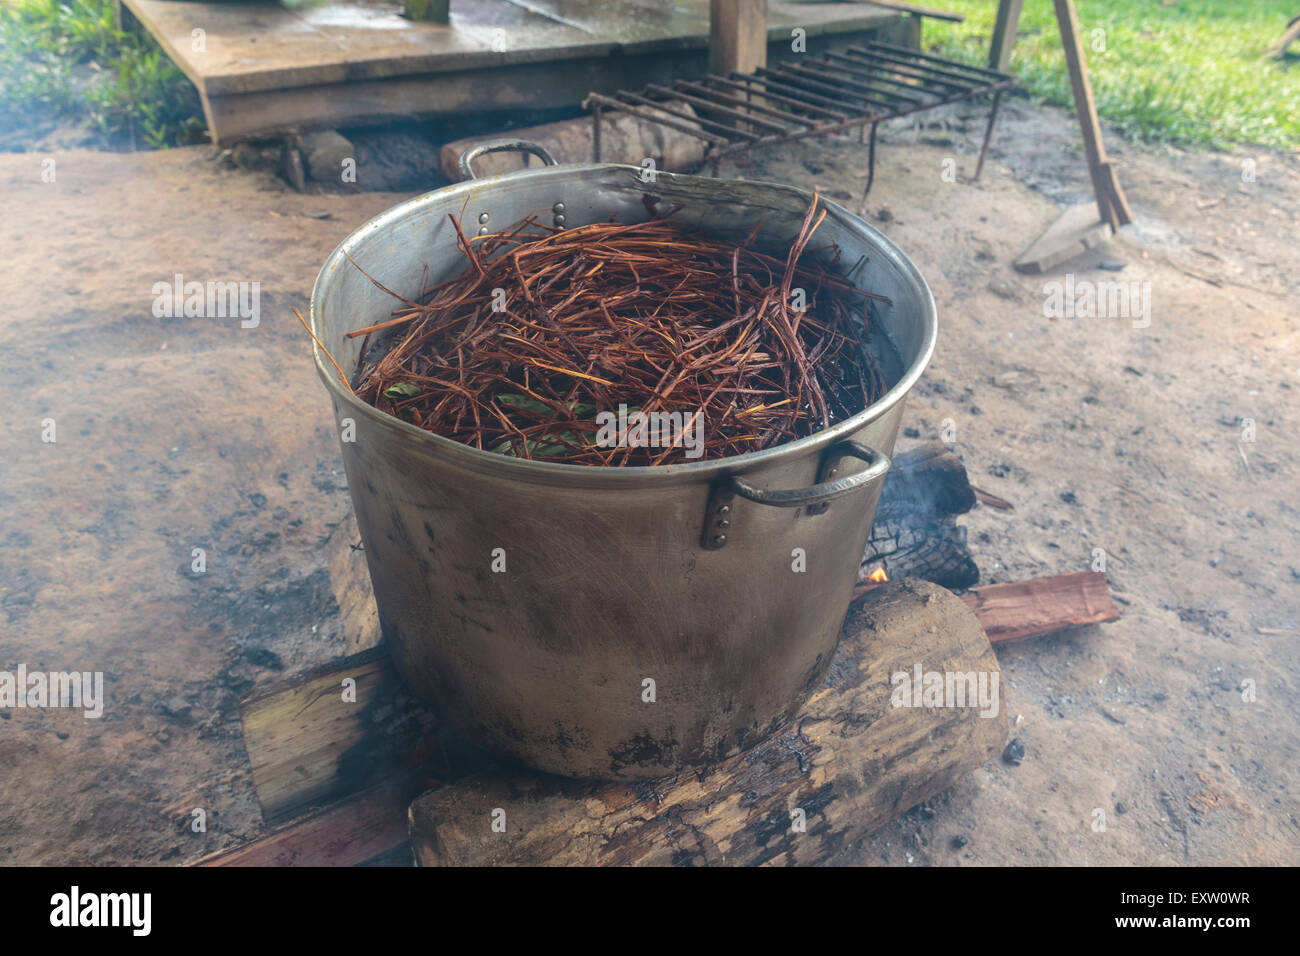 A forty litre pot boils, containing shredded Ayahuasca vine, or B caapi, and the leaves of the Chacruna bush which contain DMT. Stock Photo